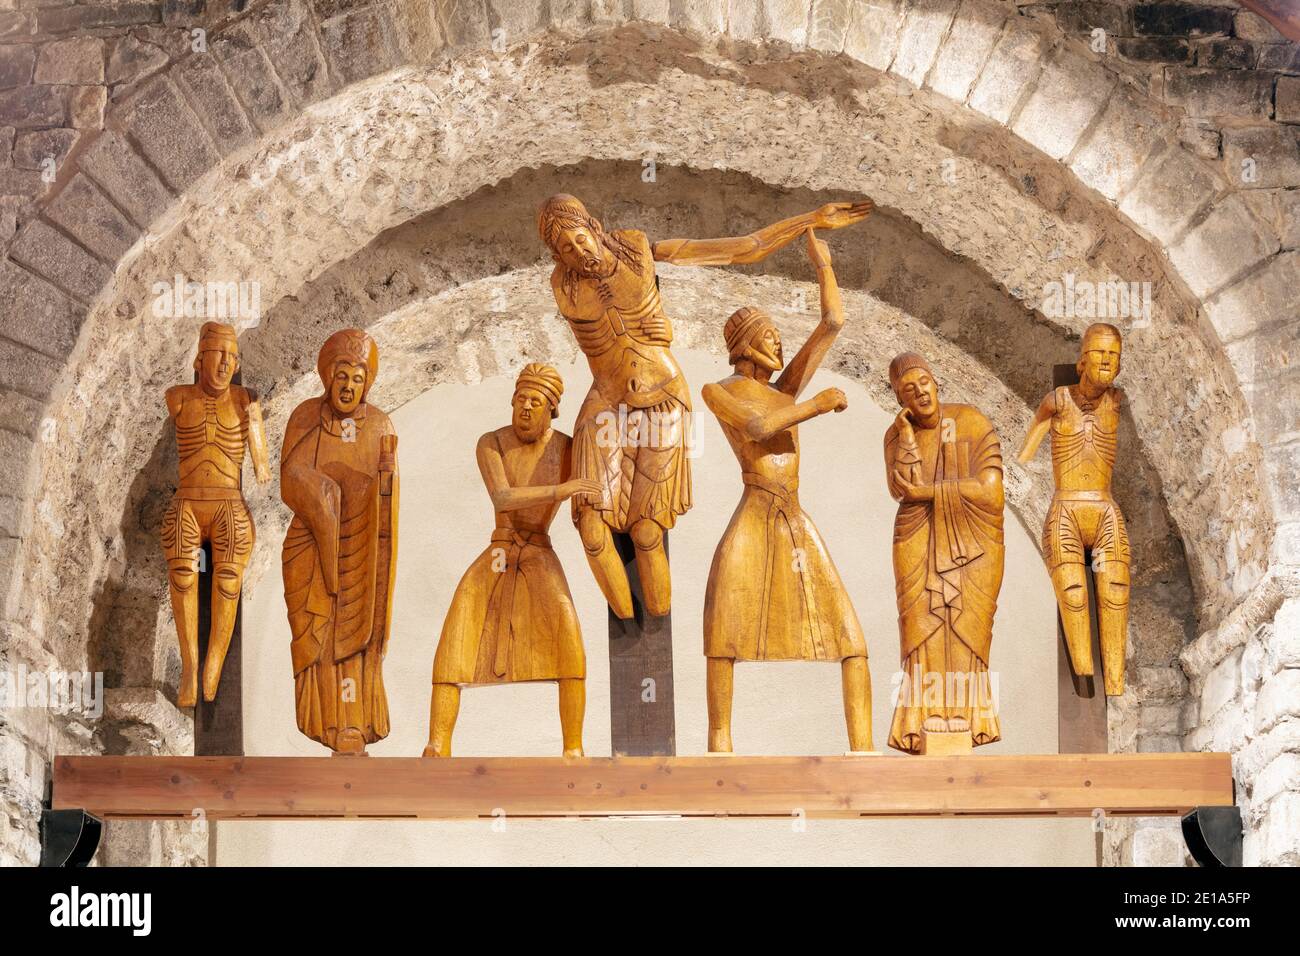 12th century wooden sculptured group of the Descent from the Cross.   12th century Santa Eulalia church, Erill la Vall, Lleida Province, Catalonia, Sp Stock Photo